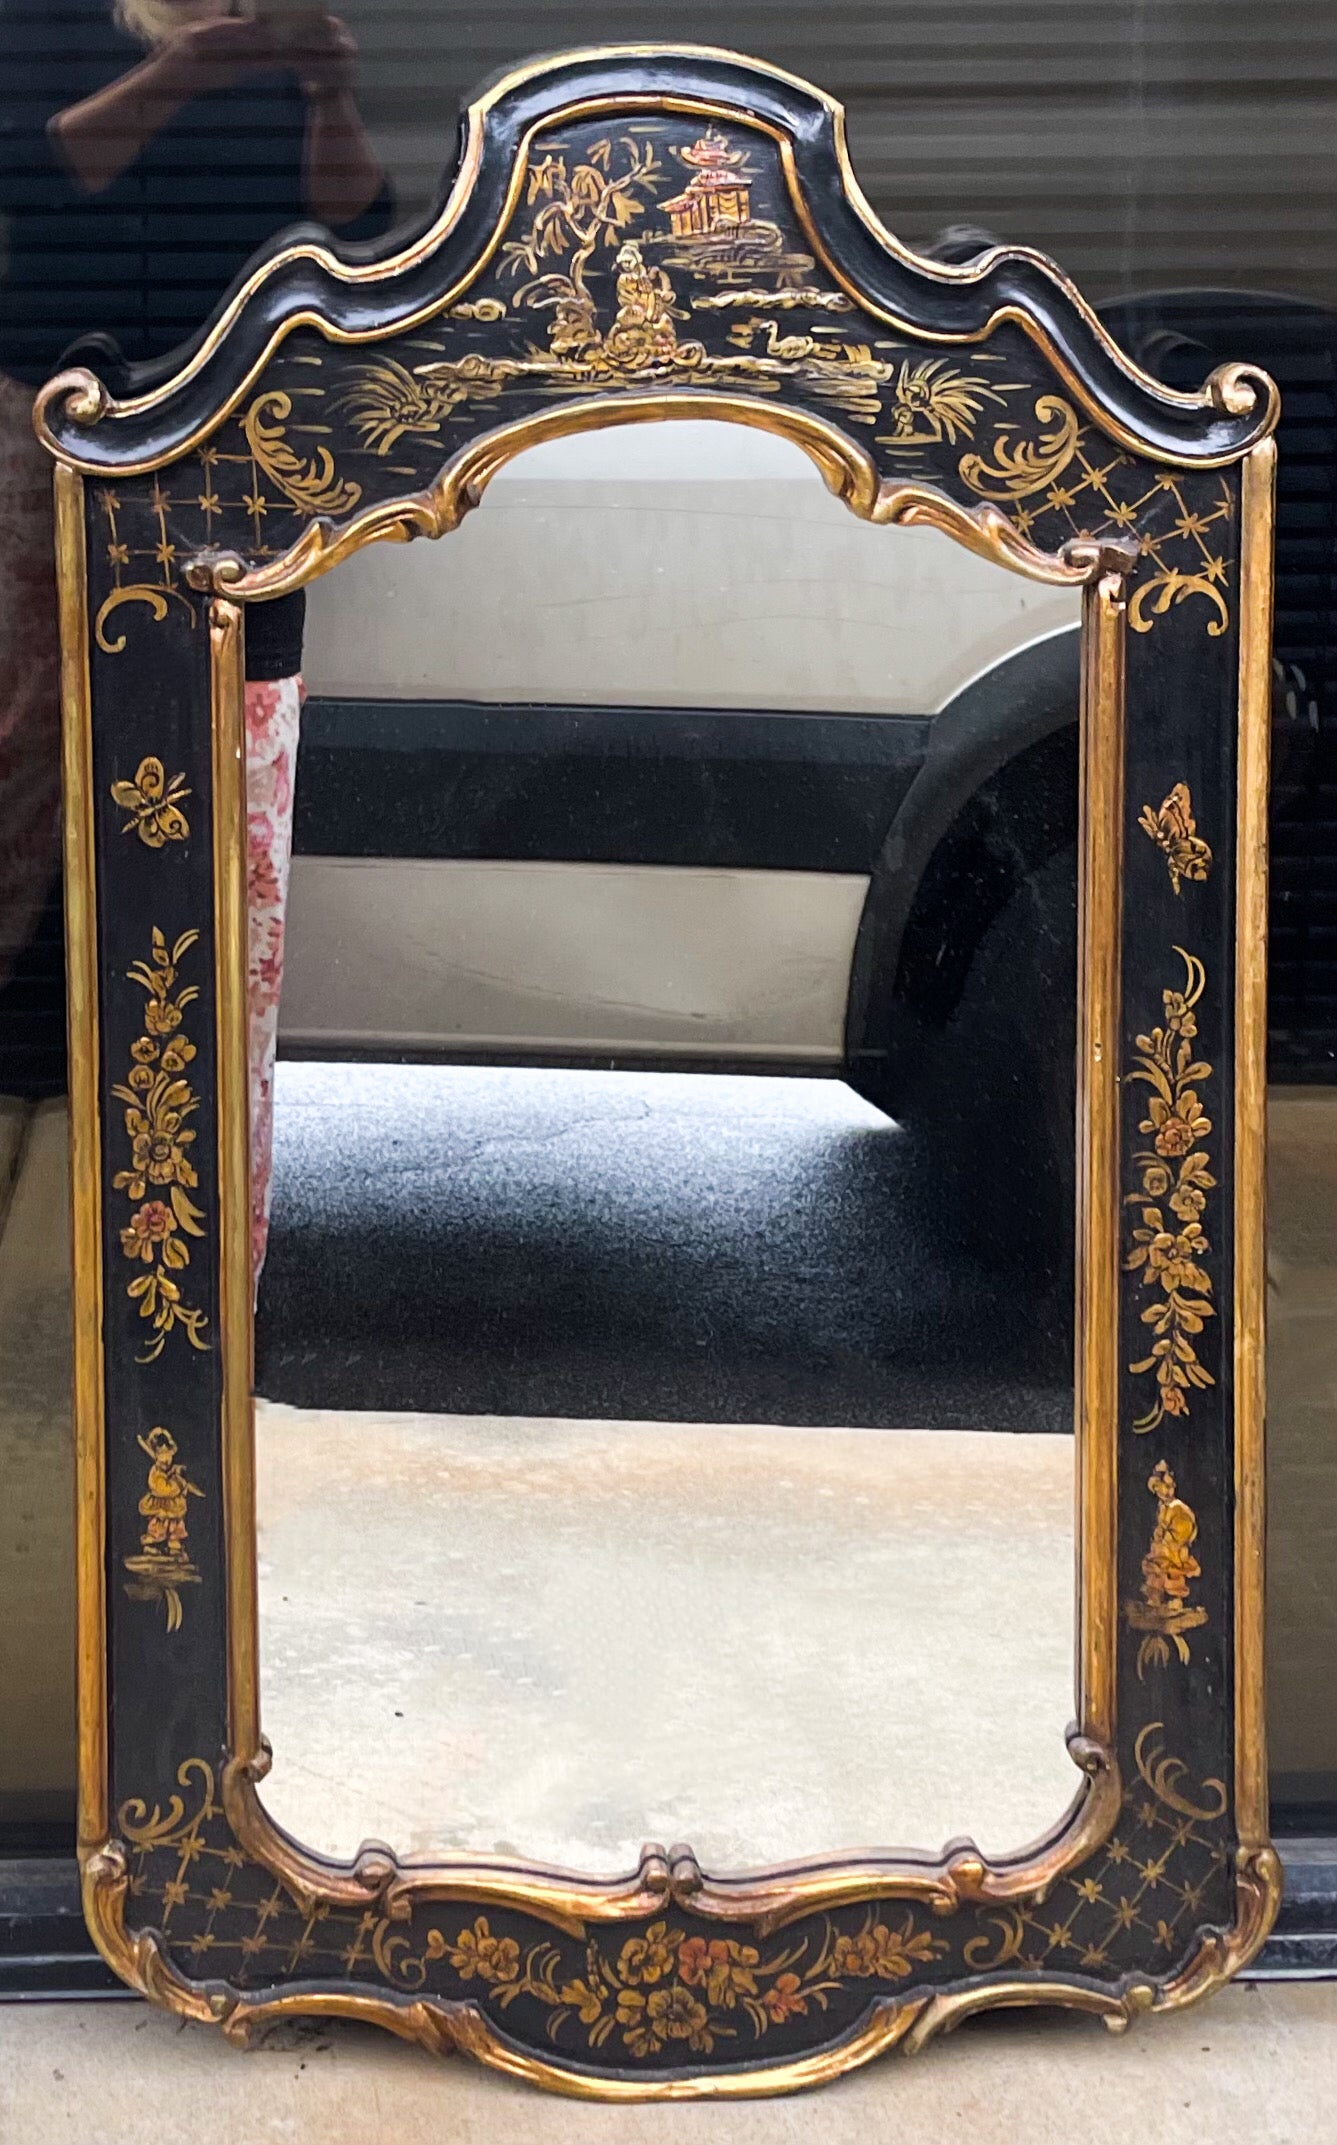 This is a 1960s Italian giltwood and black lacquer chinoiserie painted mirrors. It is unmarked and in very good condition.